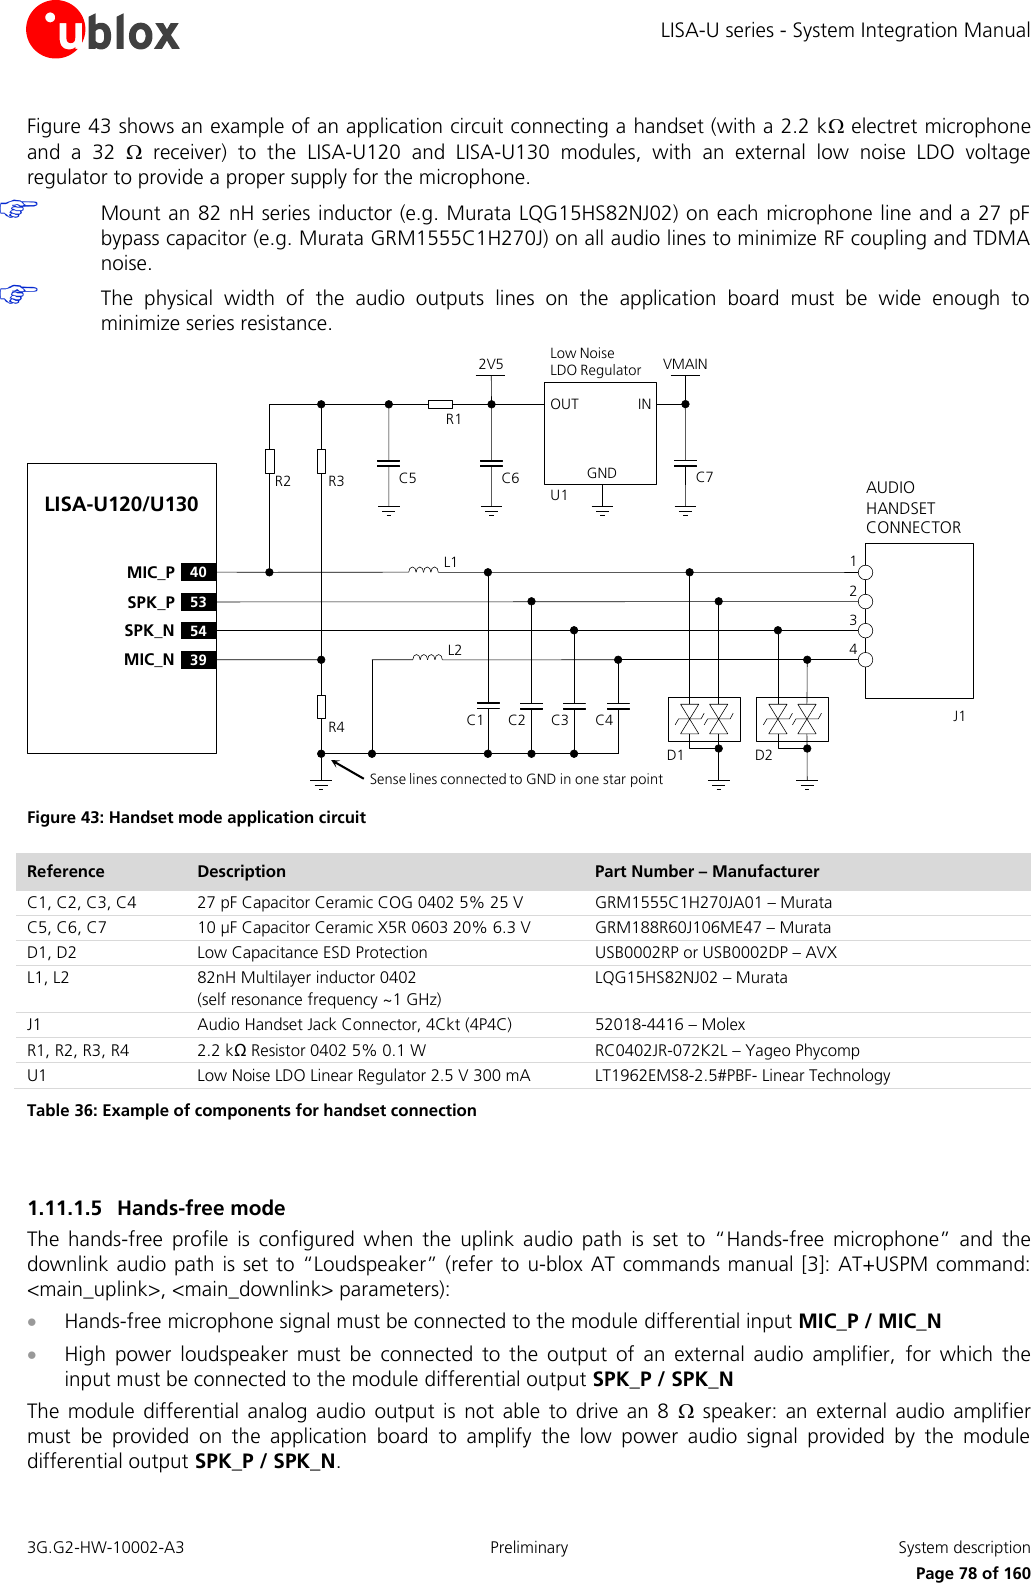 LISA-U series - System Integration Manual 3G.G2-HW-10002-A3  Preliminary  System description      Page 78 of 160 Figure 43 shows an example of an application circuit connecting a handset (with a 2.2 k electret microphone and  a  32    receiver)  to  the  LISA-U120  and  LISA-U130  modules,  with  an  external  low  noise  LDO  voltage regulator to provide a proper supply for the microphone.  Mount an 82 nH series inductor (e.g. Murata LQG15HS82NJ02) on each microphone line and a 27 pF bypass capacitor (e.g. Murata GRM1555C1H270J) on all audio lines to minimize RF coupling and TDMA noise.  The  physical  width  of  the  audio  outputs  lines  on  the  application  board  must  be  wide  enough  to minimize series resistance. LISA-U120/U130C1 C2 C3 J14321L153SPK_P54SPK_N40MIC_P39MIC_ND1AUDIO HANDSET CONNECTORD2INOUTGNDLow Noise LDO RegulatorU1R4R1C6R3R2 C52V5Sense lines connected to GND in one star pointC4L2VMAINC7 Figure 43: Handset mode application circuit Reference Description Part Number – Manufacturer C1, C2, C3, C4 27 pF Capacitor Ceramic COG 0402 5% 25 V  GRM1555C1H270JA01 – Murata C5, C6, C7 10 µF Capacitor Ceramic X5R 0603 20% 6.3 V GRM188R60J106ME47 – Murata D1, D2 Low Capacitance ESD Protection USB0002RP or USB0002DP – AVX L1, L2 82nH Multilayer inductor 0402 (self resonance frequency ~1 GHz) LQG15HS82NJ02 – Murata J1 Audio Handset Jack Connector, 4Ckt (4P4C) 52018-4416 – Molex  R1, R2, R3, R4 2.2 kΩ Resistor 0402 5% 0.1 W  RC0402JR-072K2L – Yageo Phycomp U1 Low Noise LDO Linear Regulator 2.5 V 300 mA LT1962EMS8-2.5#PBF- Linear Technology Table 36: Example of components for handset connection  1.11.1.5 Hands-free mode The  hands-free  profile  is  configured  when  the  uplink  audio  path  is  set  to  “Hands-free  microphone”  and  the downlink audio path is set to “Loudspeaker” (refer to  u-blox AT commands manual [3]: AT+USPM command: &lt;main_uplink&gt;, &lt;main_downlink&gt; parameters):  Hands-free microphone signal must be connected to the module differential input MIC_P / MIC_N  High  power  loudspeaker  must  be  connected  to  the  output  of  an  external  audio  amplifier,  for  which  the input must be connected to the module differential output SPK_P / SPK_N The  module differential  analog audio  output  is  not able  to drive  an  8    speaker:  an  external  audio amplifier must  be  provided  on  the  application  board  to  amplify  the  low  power  audio  signal  provided  by  the  module differential output SPK_P / SPK_N. 